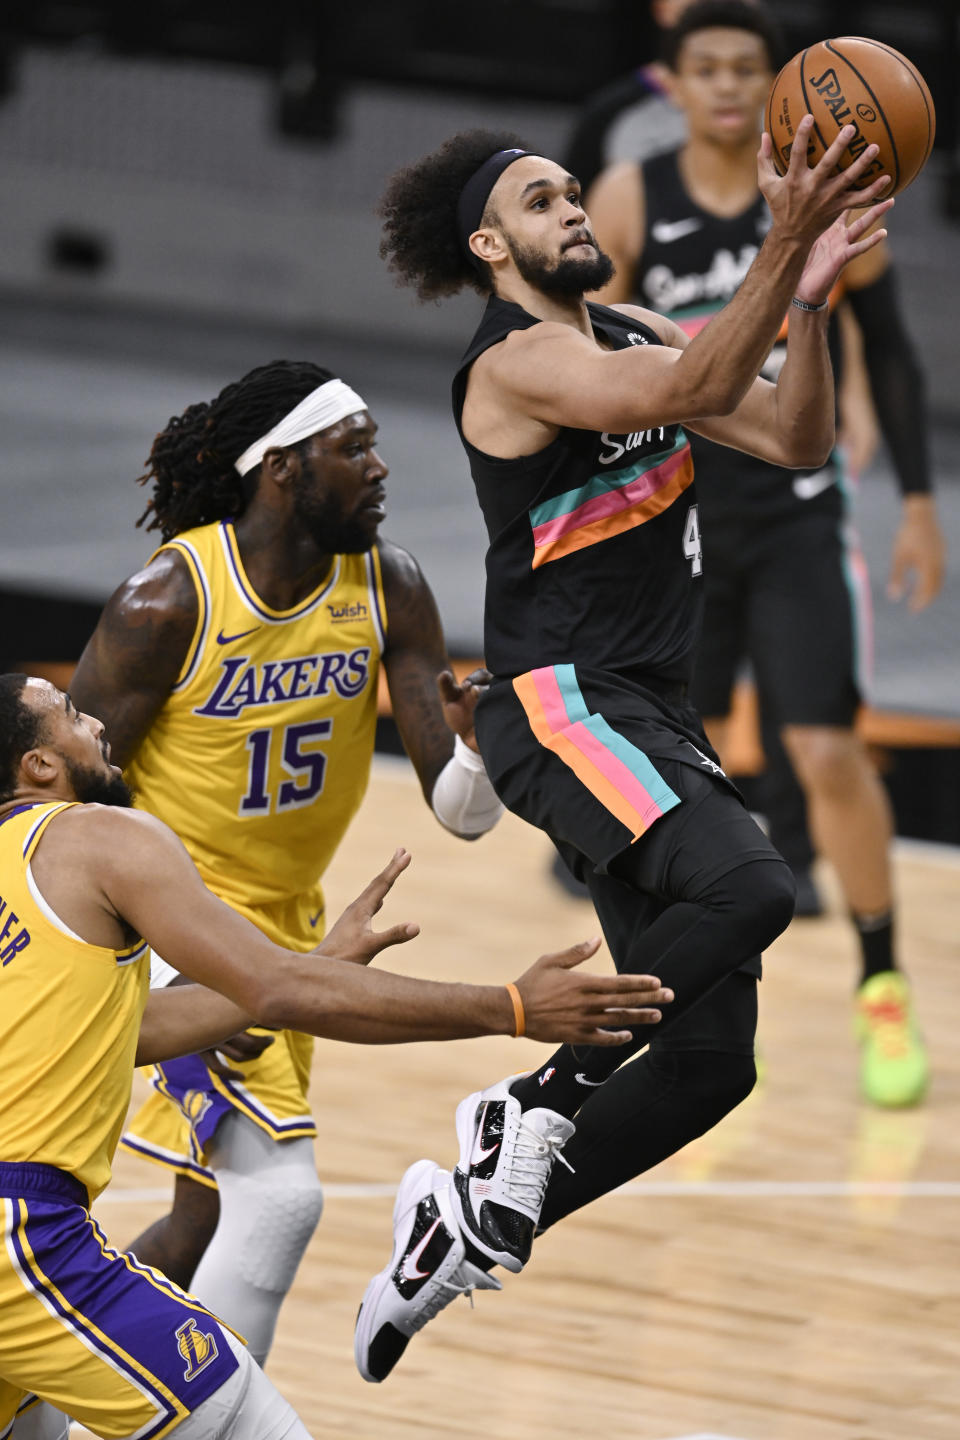 San Antonio Spurs' Derrick White (4) shoots as Los Angeles Lakers' Montrezl Harrell (15) and Talen Horton-Tucker defend during the first half of an NBA basketball game Friday, Jan. 1, 2021, in San Antonio. (AP Photo/Darren Abate)